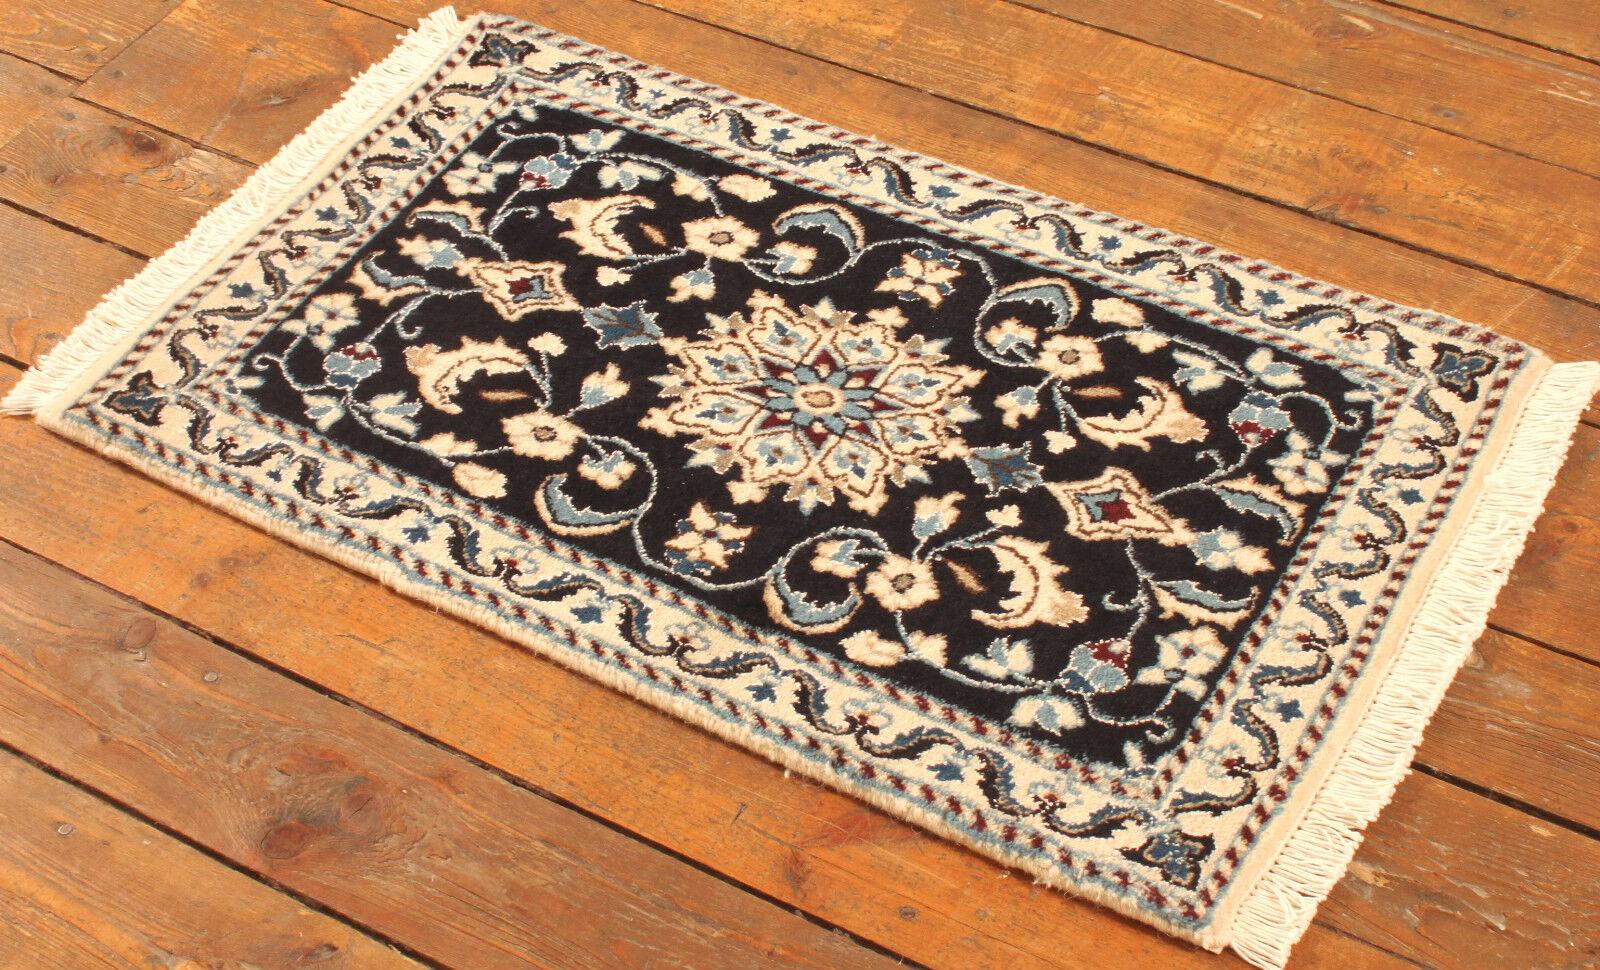 Late 20th Century Handmade Vintage Persian Style Nain Rug 1.9' x 2.9', 1980s - 1T49 For Sale